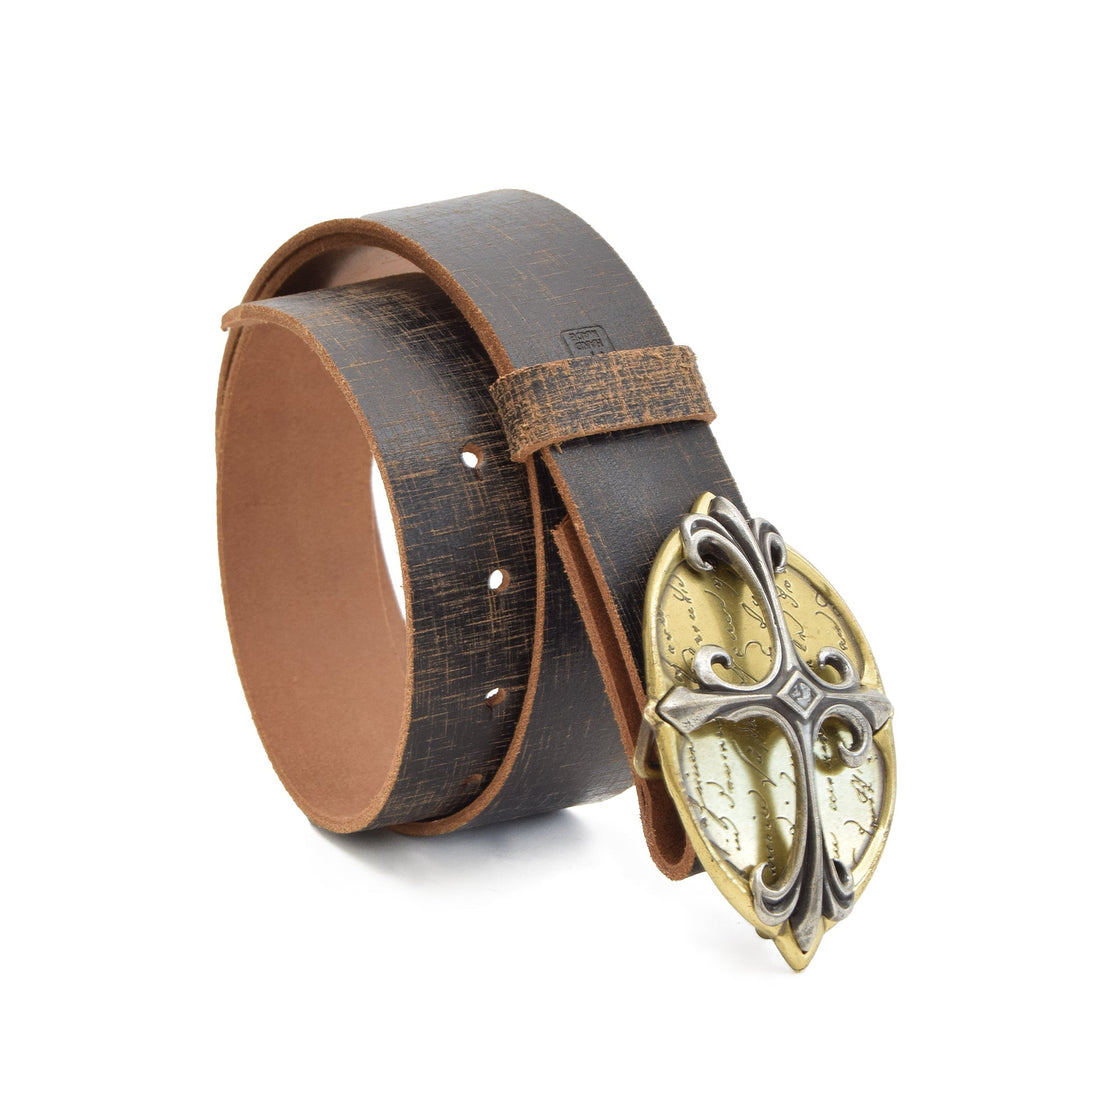 Hues Leather Belt Brown with Changeable Buckle - 80 - Belts Zengoda Shop online from Artisan Brands